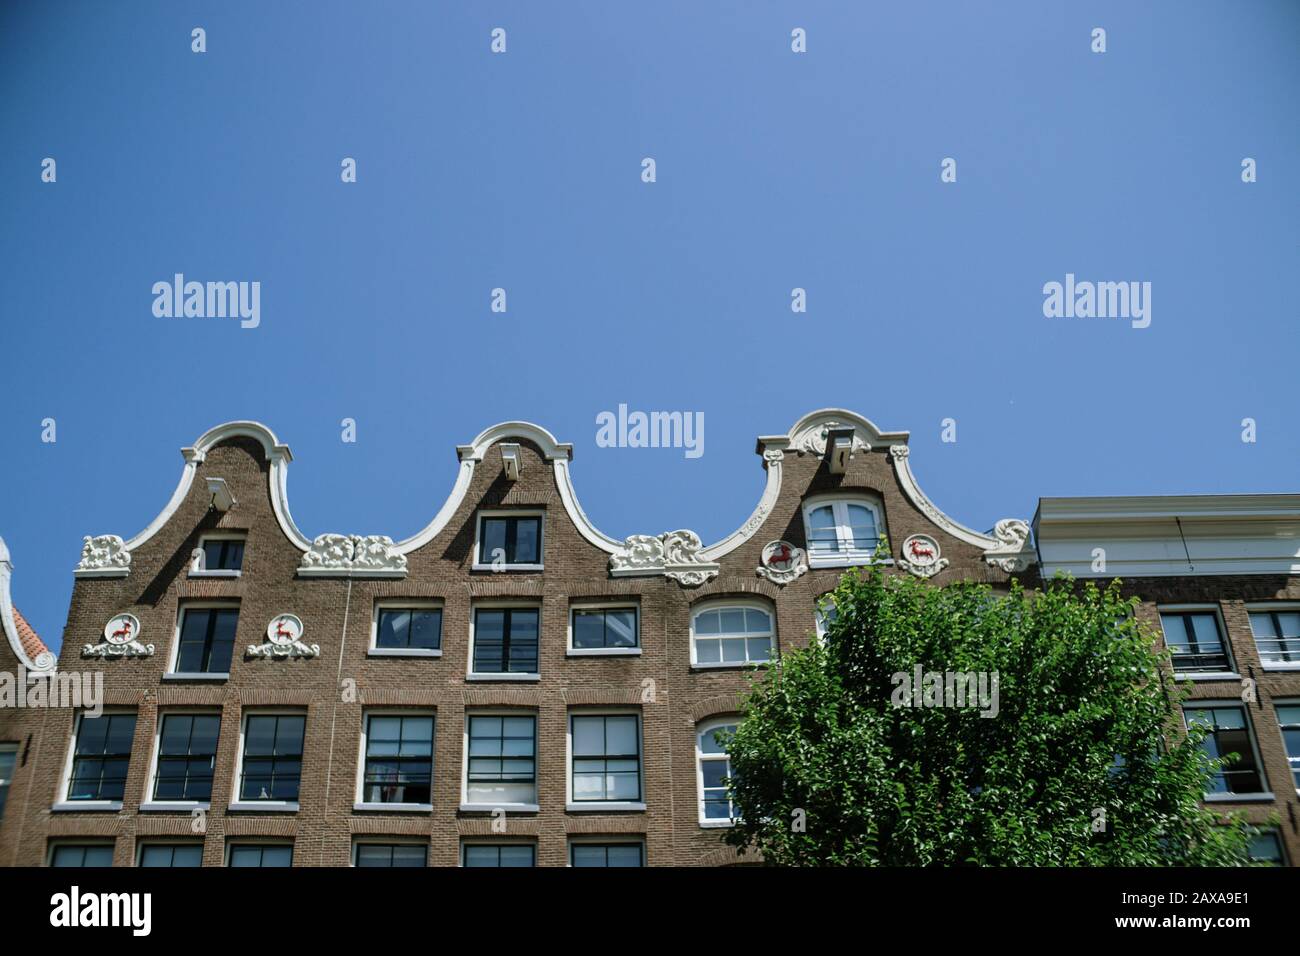 Rooftops of buildings in Amsterdam Stock Photo